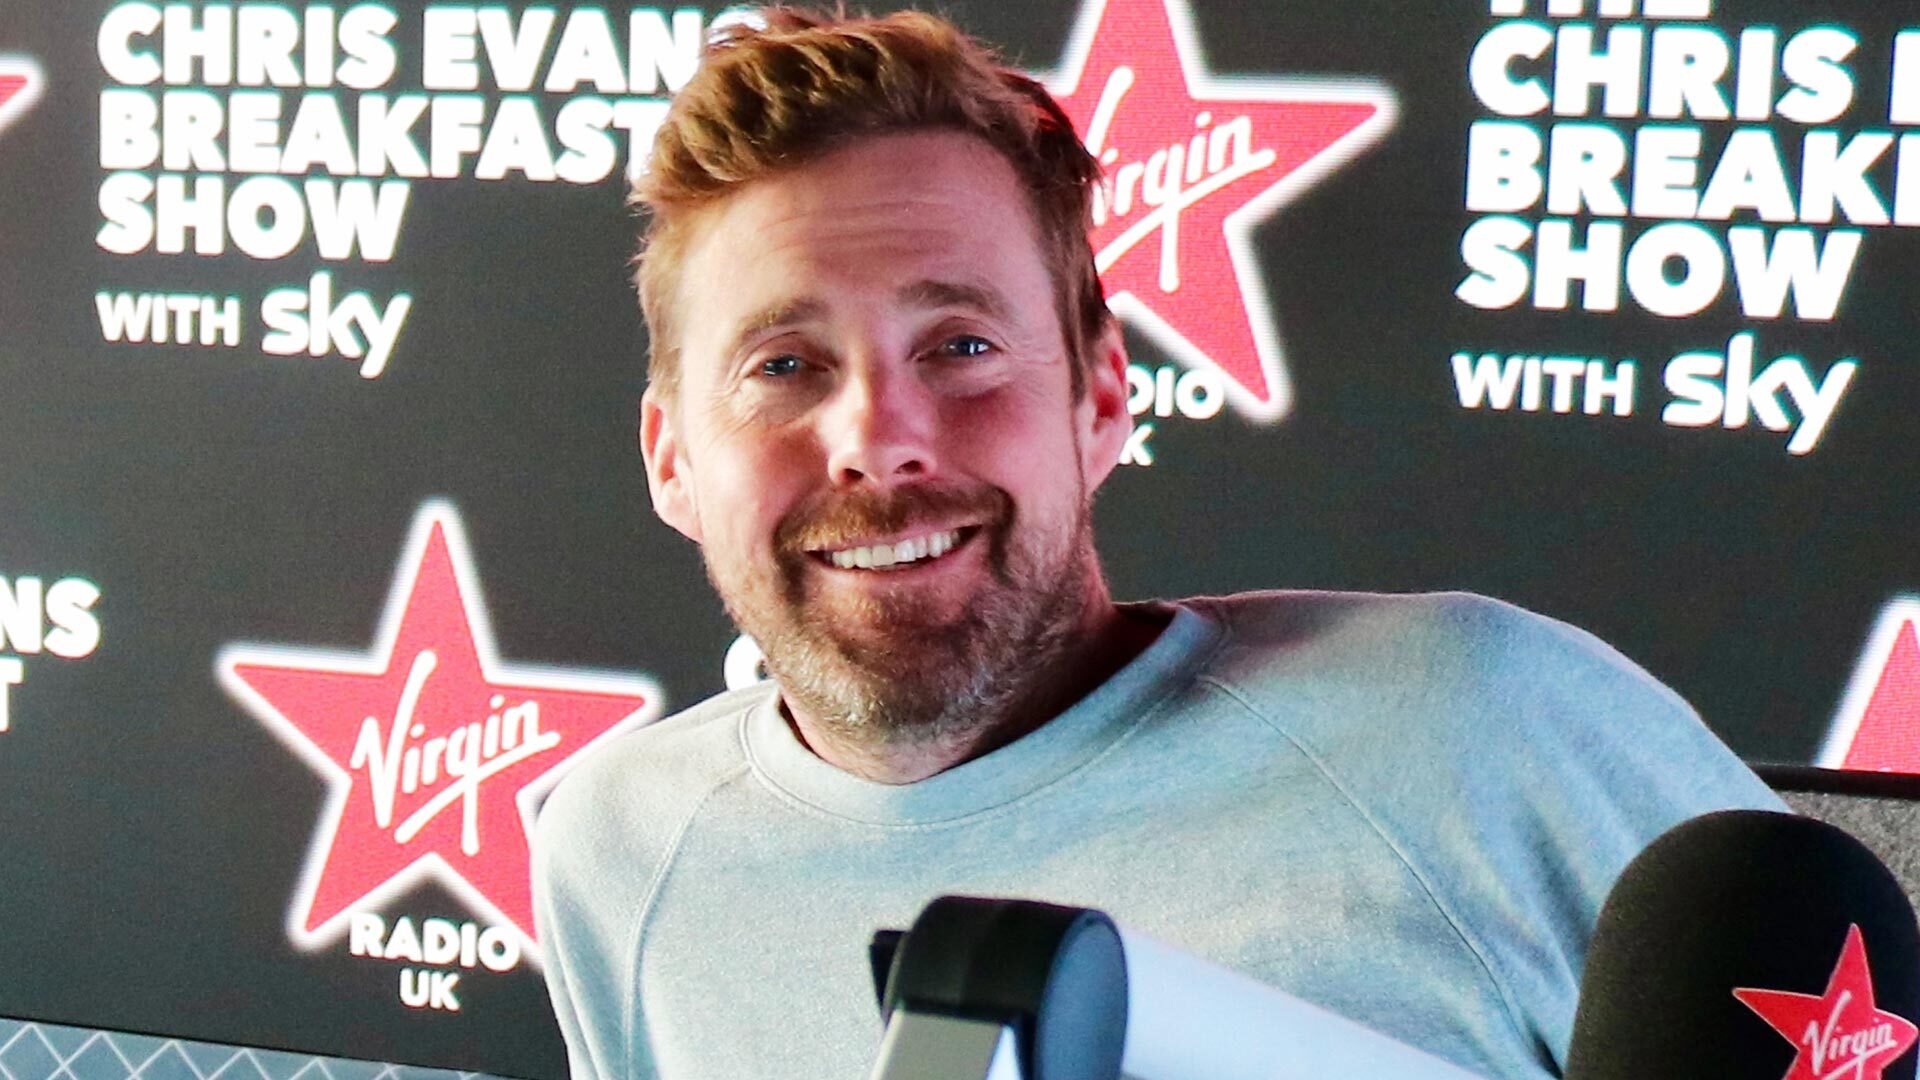 As Ricky Wilson joins Virgin Radio, he says that he wants to become the next Steve Wright.